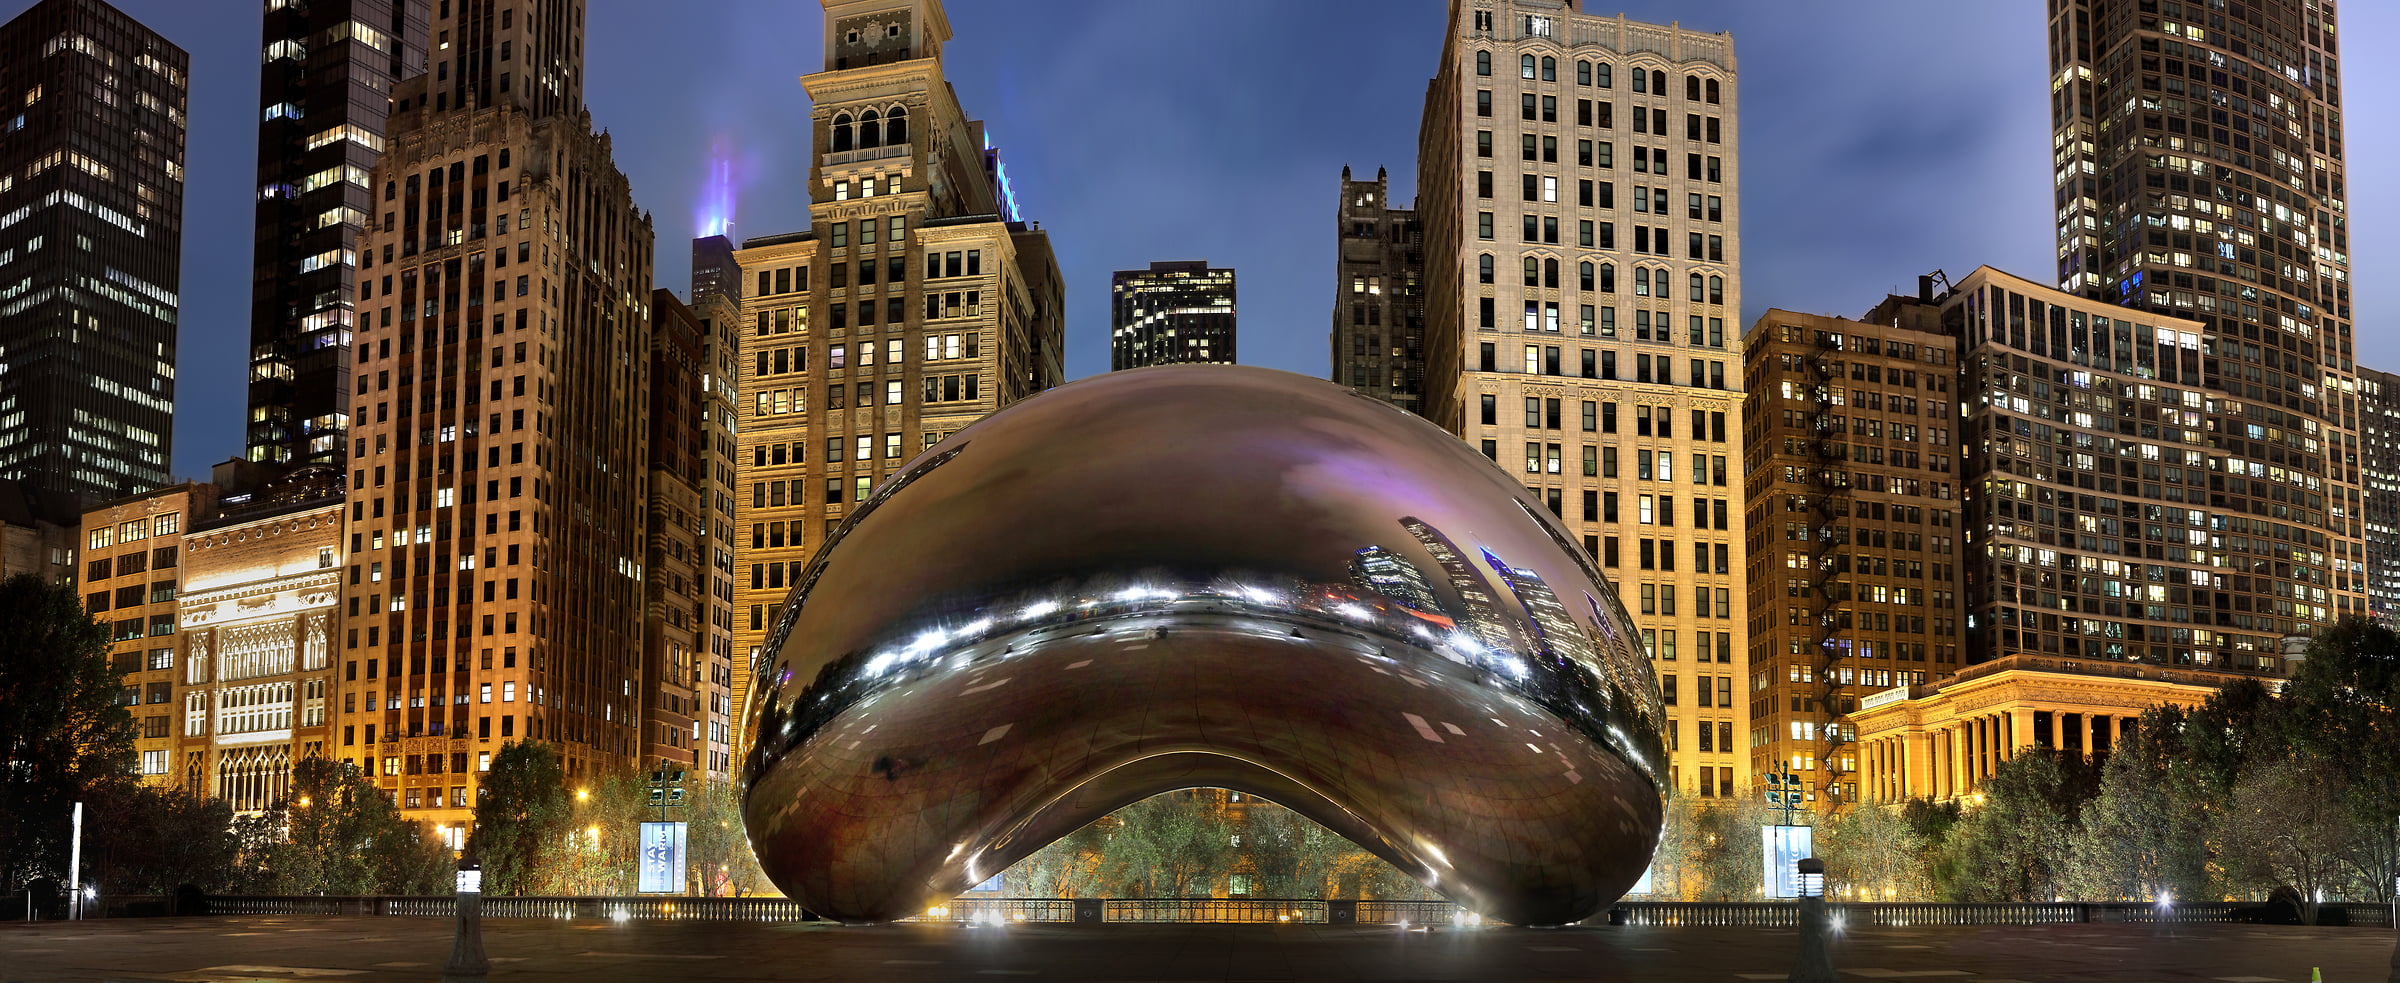 304 megapixels! A very high resolution, large-format VAST photo print of the Chicago Bean sculpture; photograph created by Phil Crawshay in Chicago, Illinois.